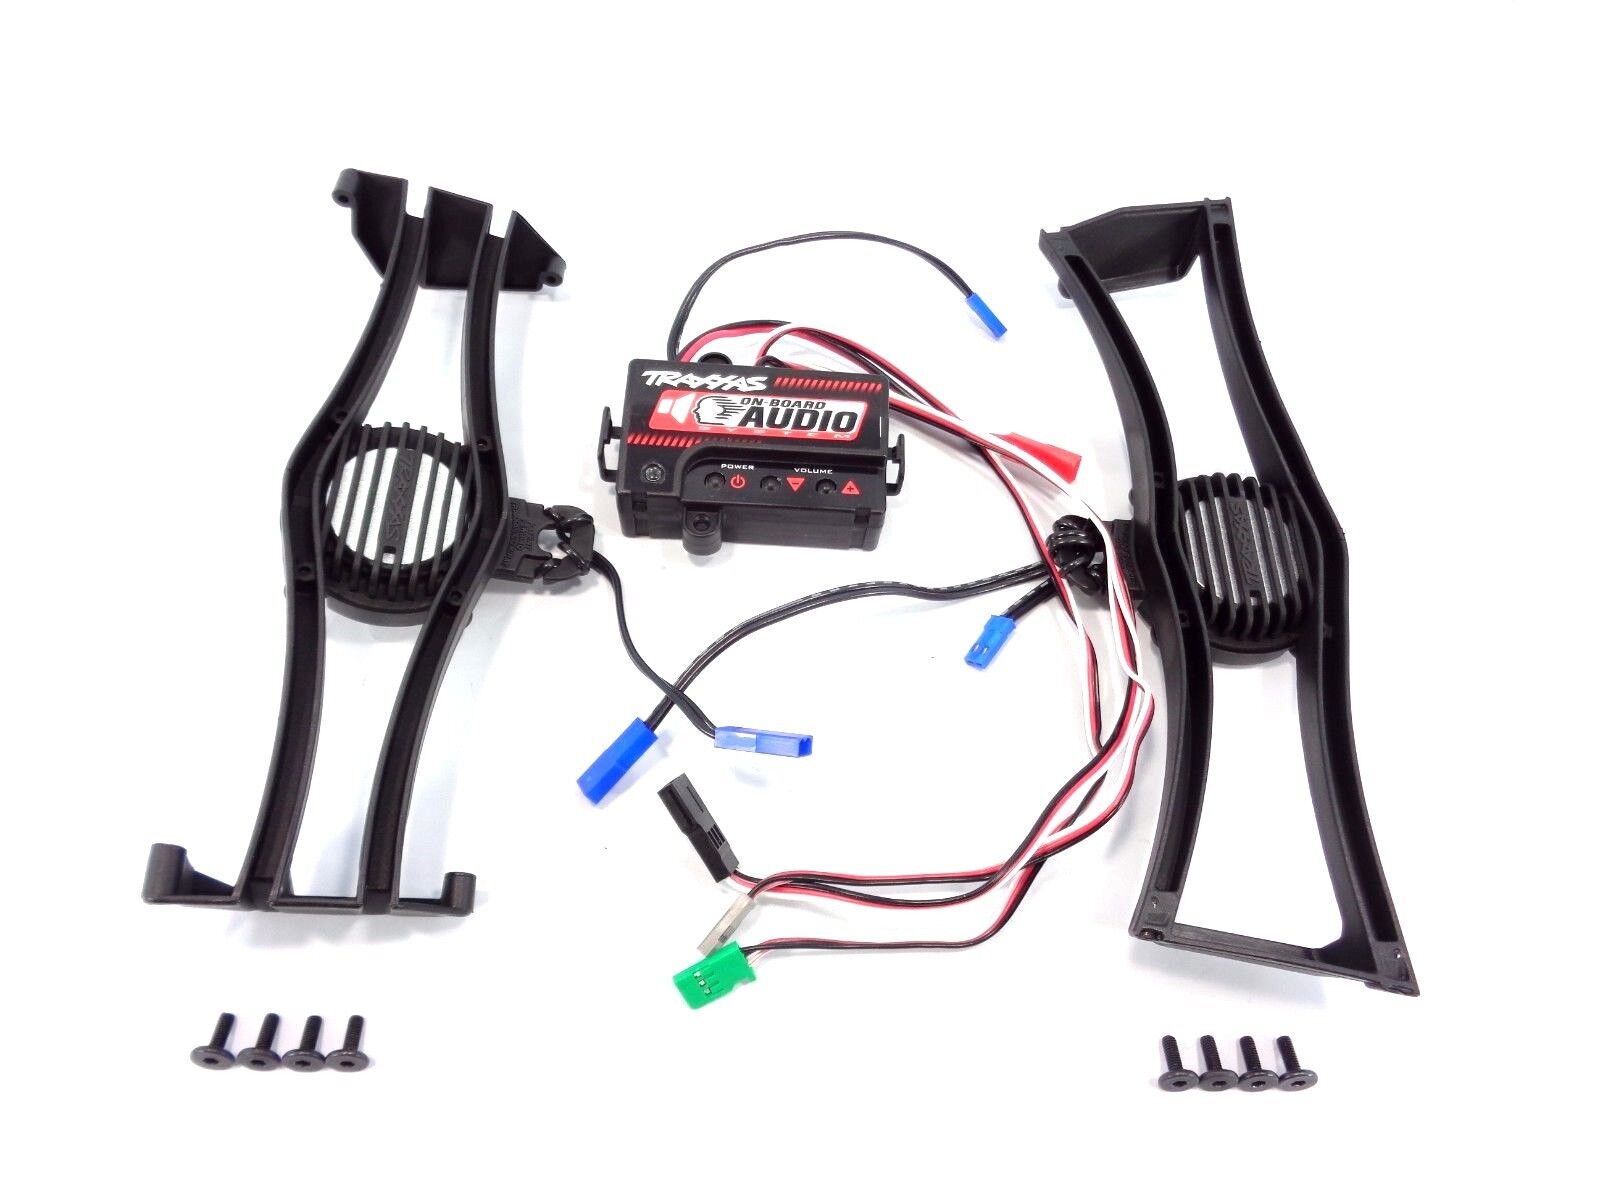 NEW TRAXXAS SLASH ON BOARD AUDIO SOUND SYSTEM WITH MODULE & SPEAKERS 2WD 4WD OBA Traxxas tra6580 tra6585